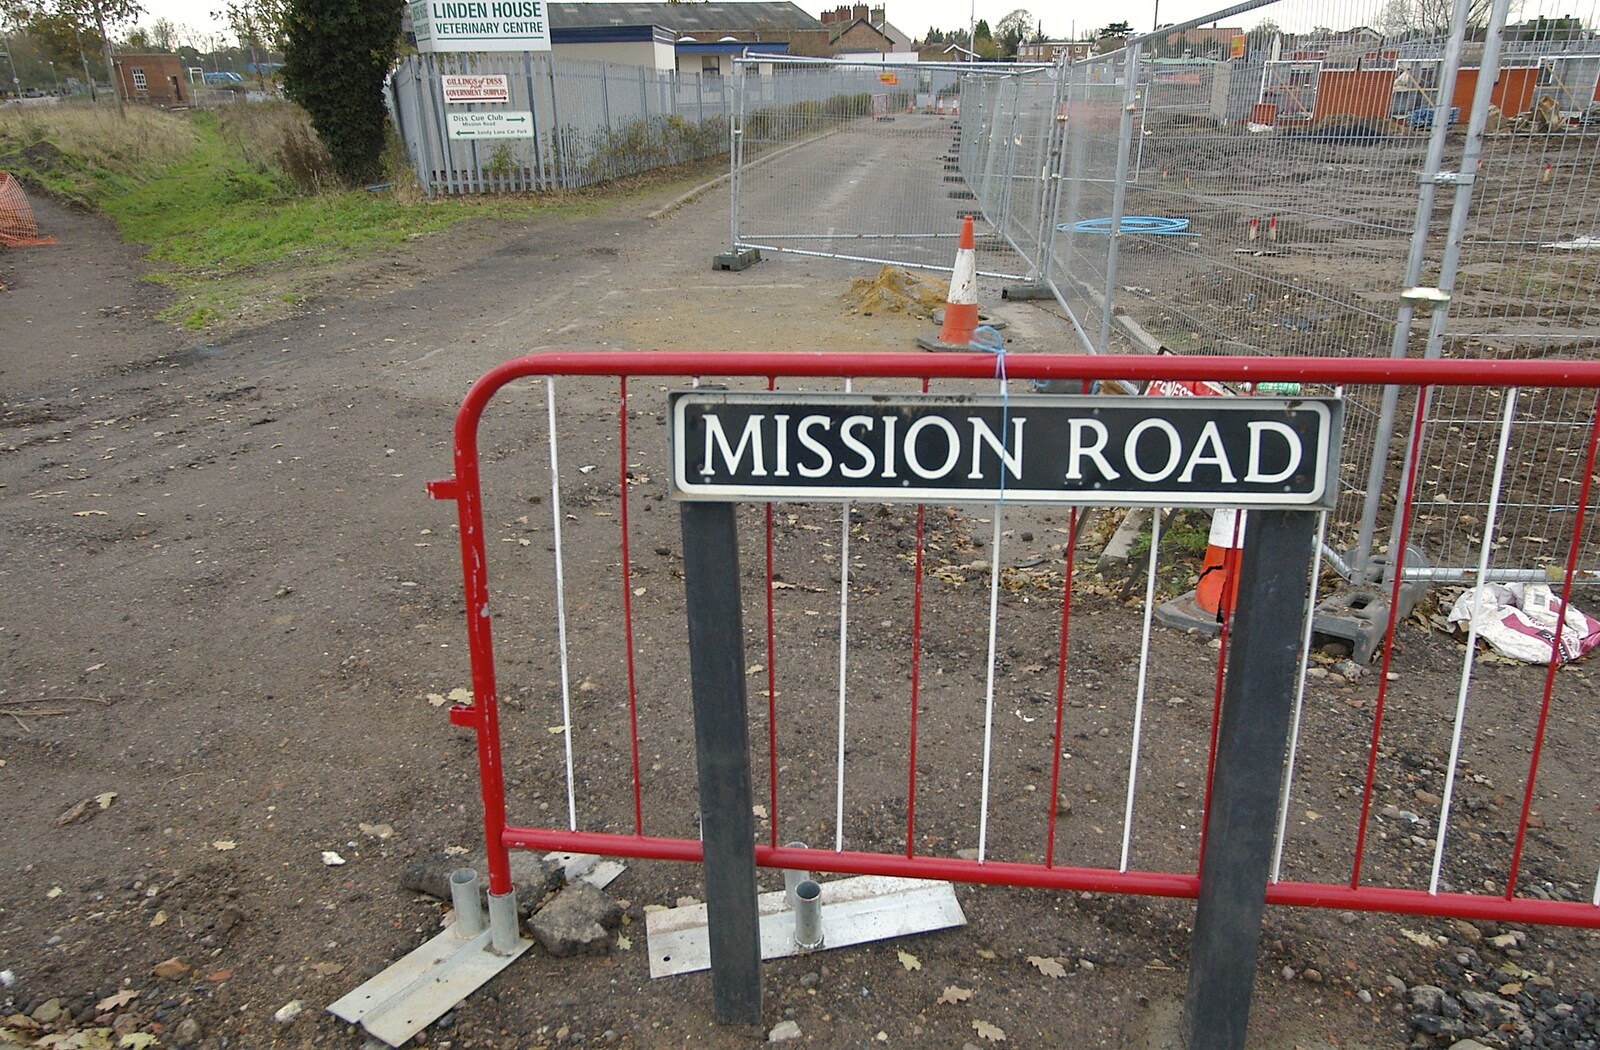 The remains of Mission Road from Post-modern Alienation: Bleak House, a Diss Miscellany, Norfolk - 3rd December 2005